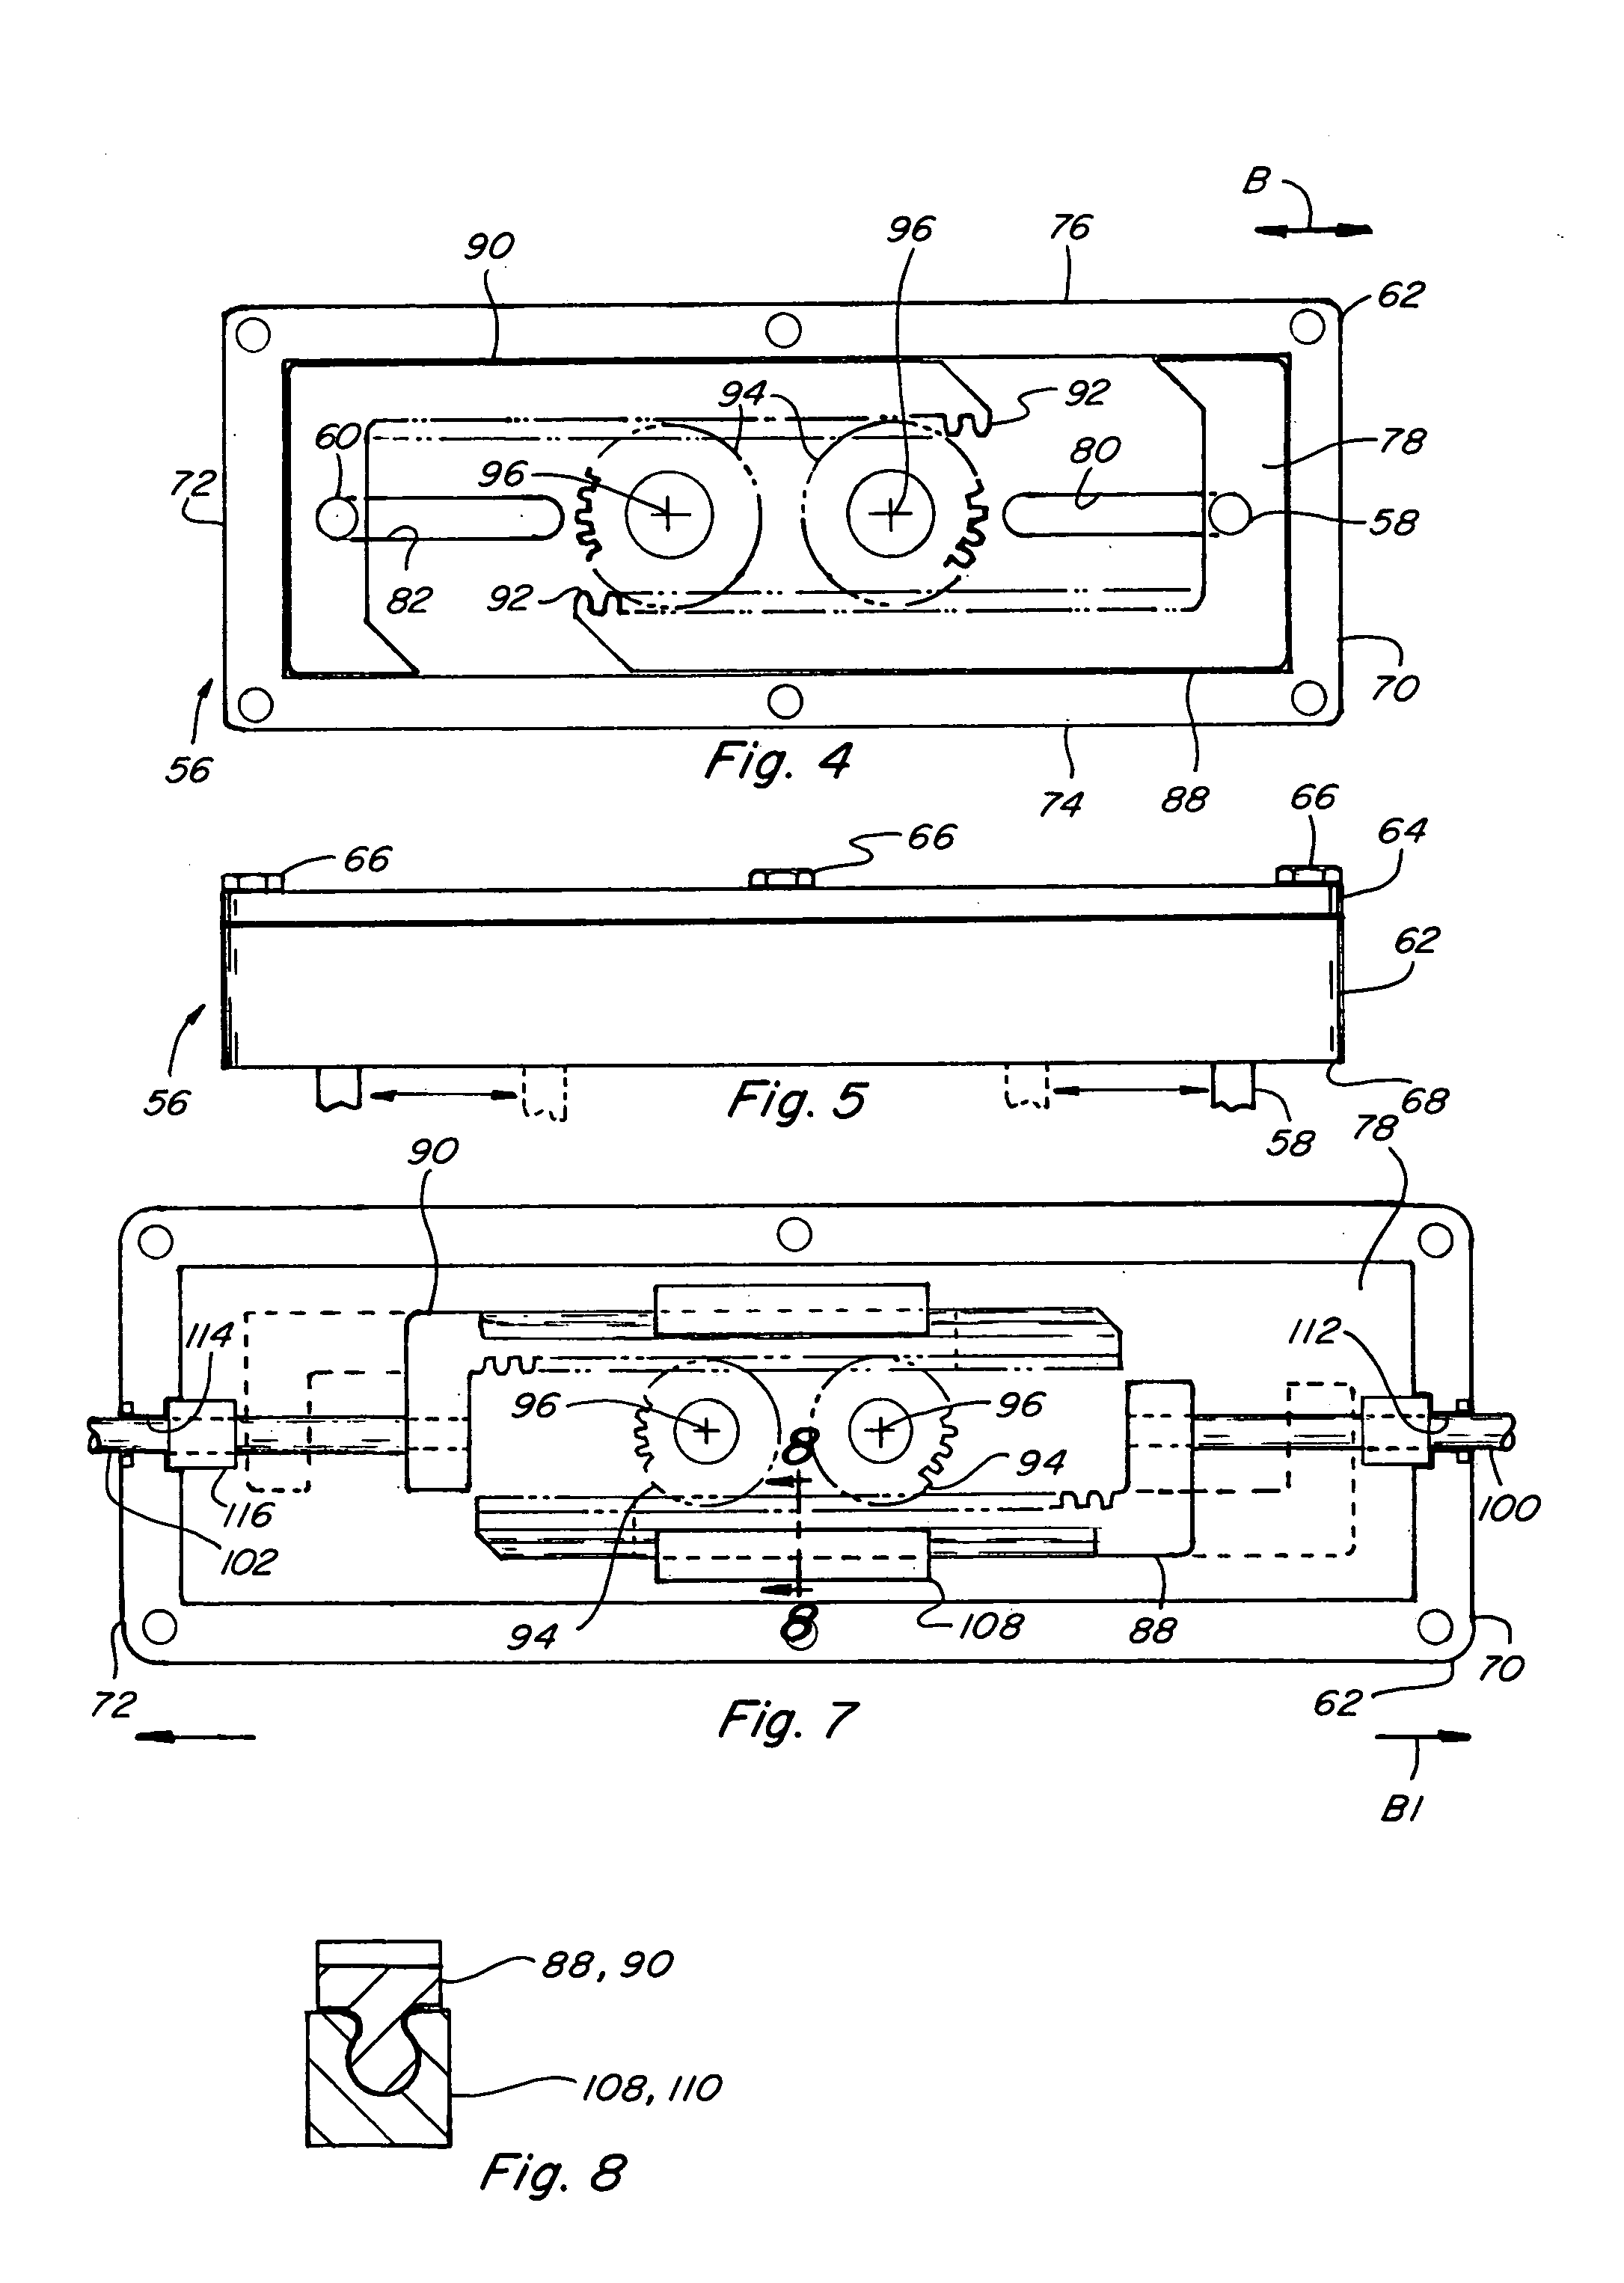 Reversing transfer drive for sickle cutting knives on a header of an agricultural combine